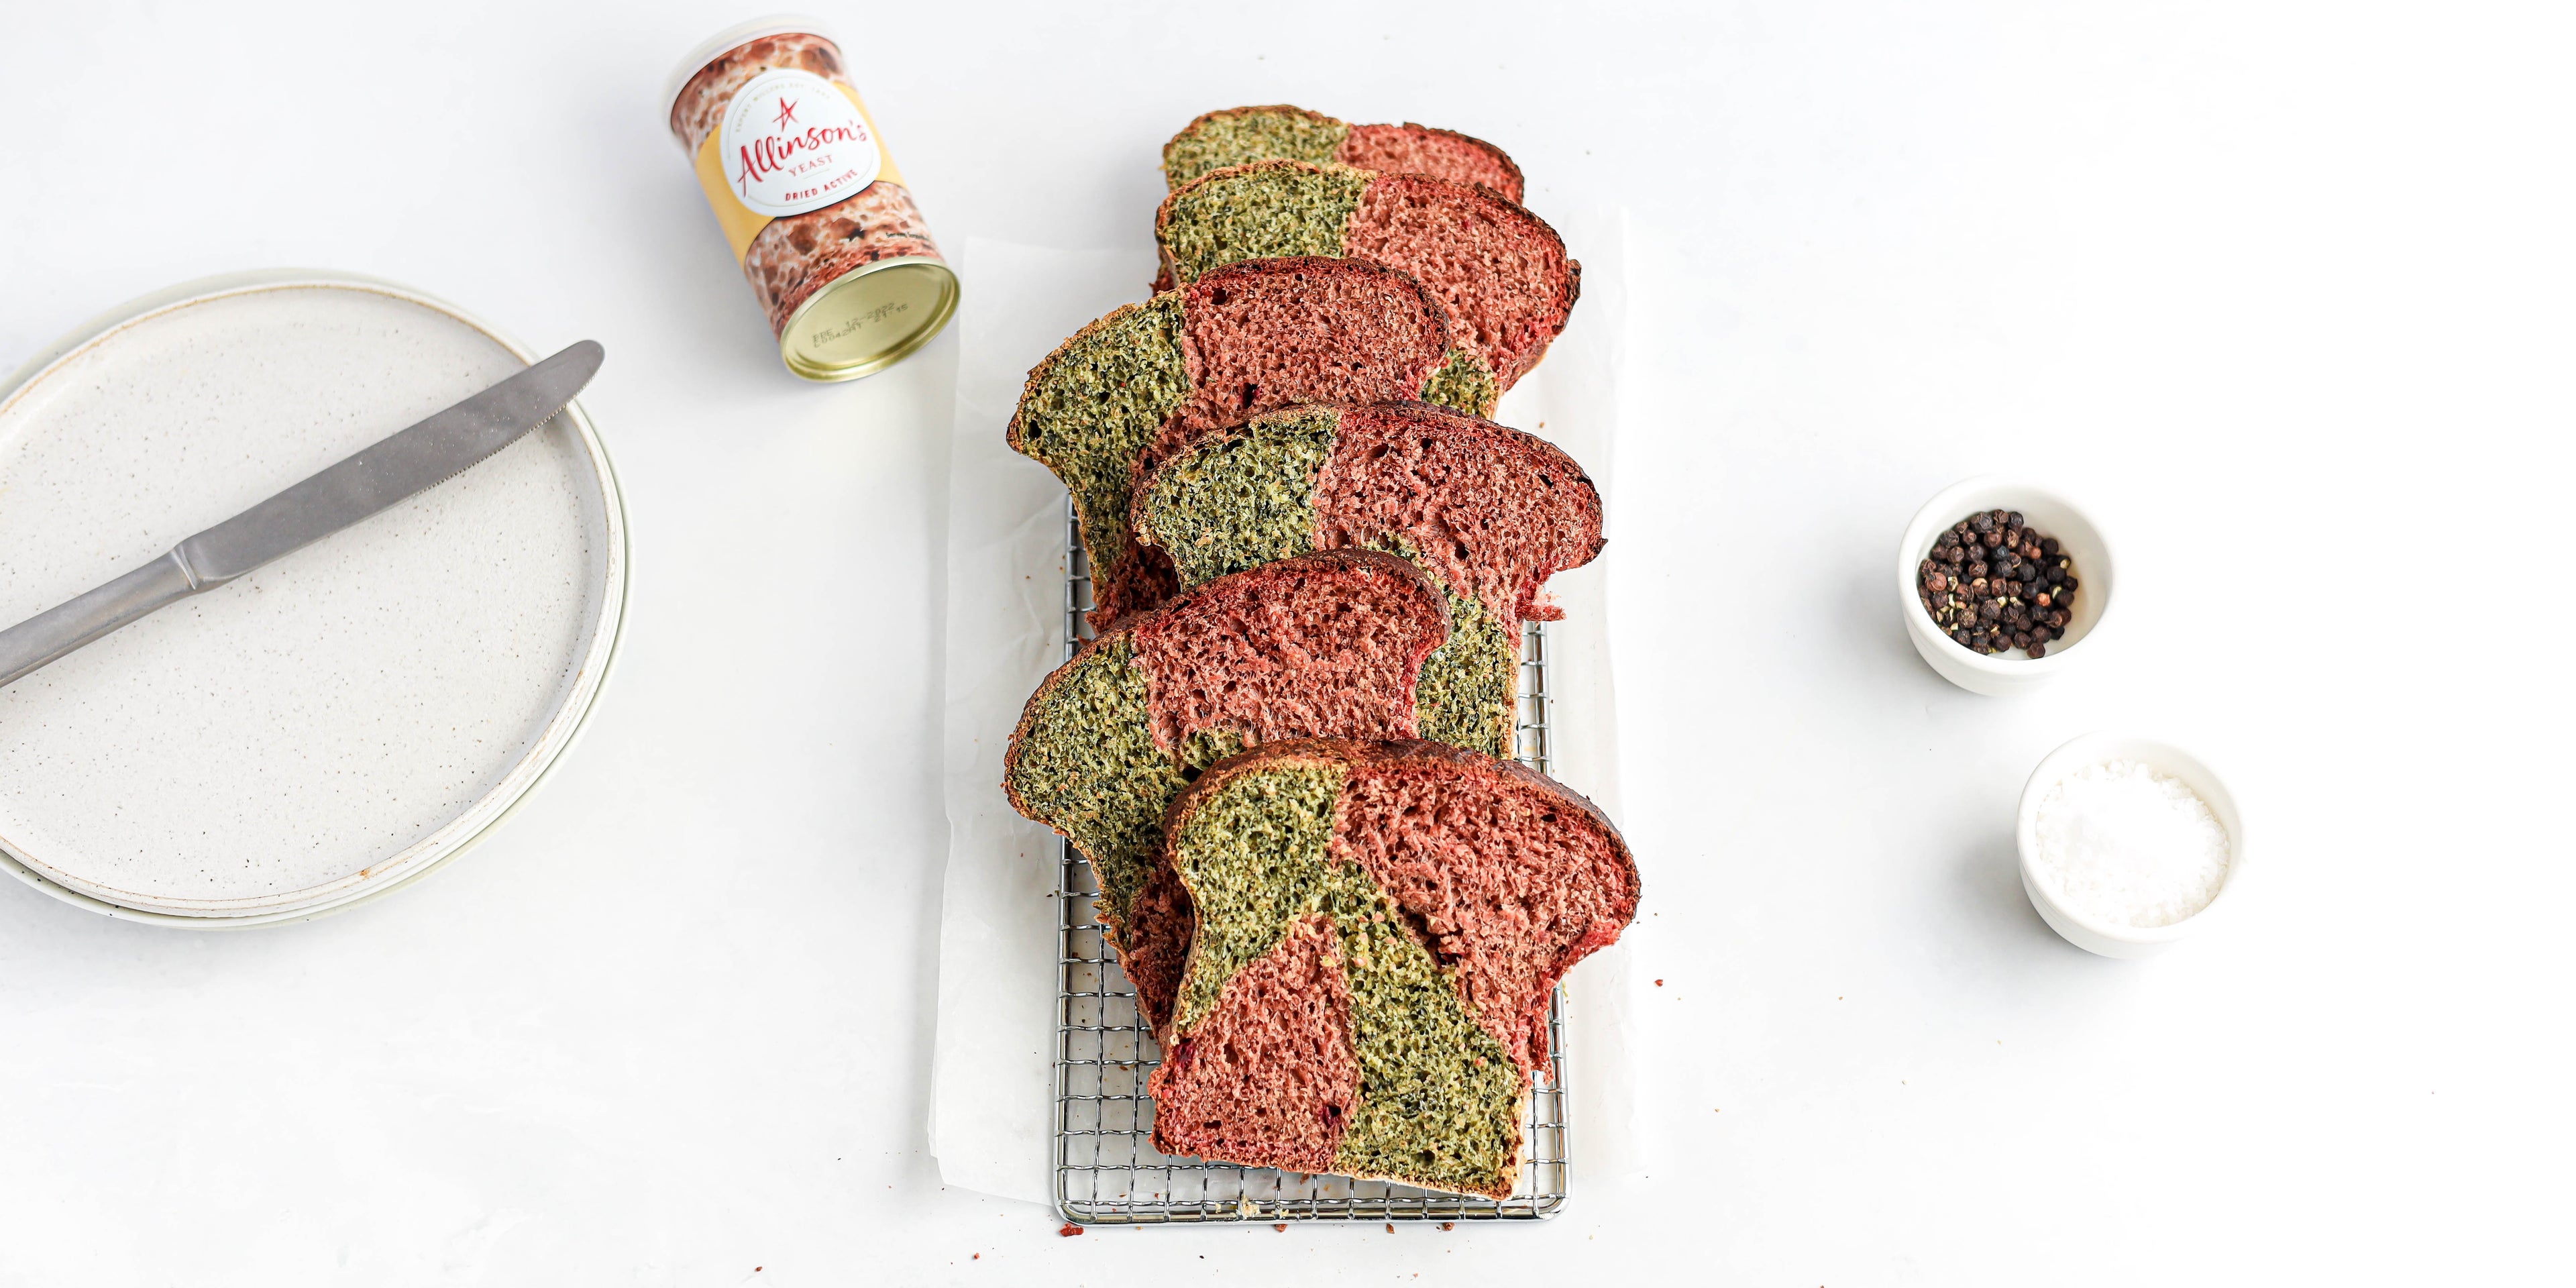 Slices of Marble Vegetable Bread spread out on a wire rack showing the pink and green insides, next to a tin of Allinson's yeast